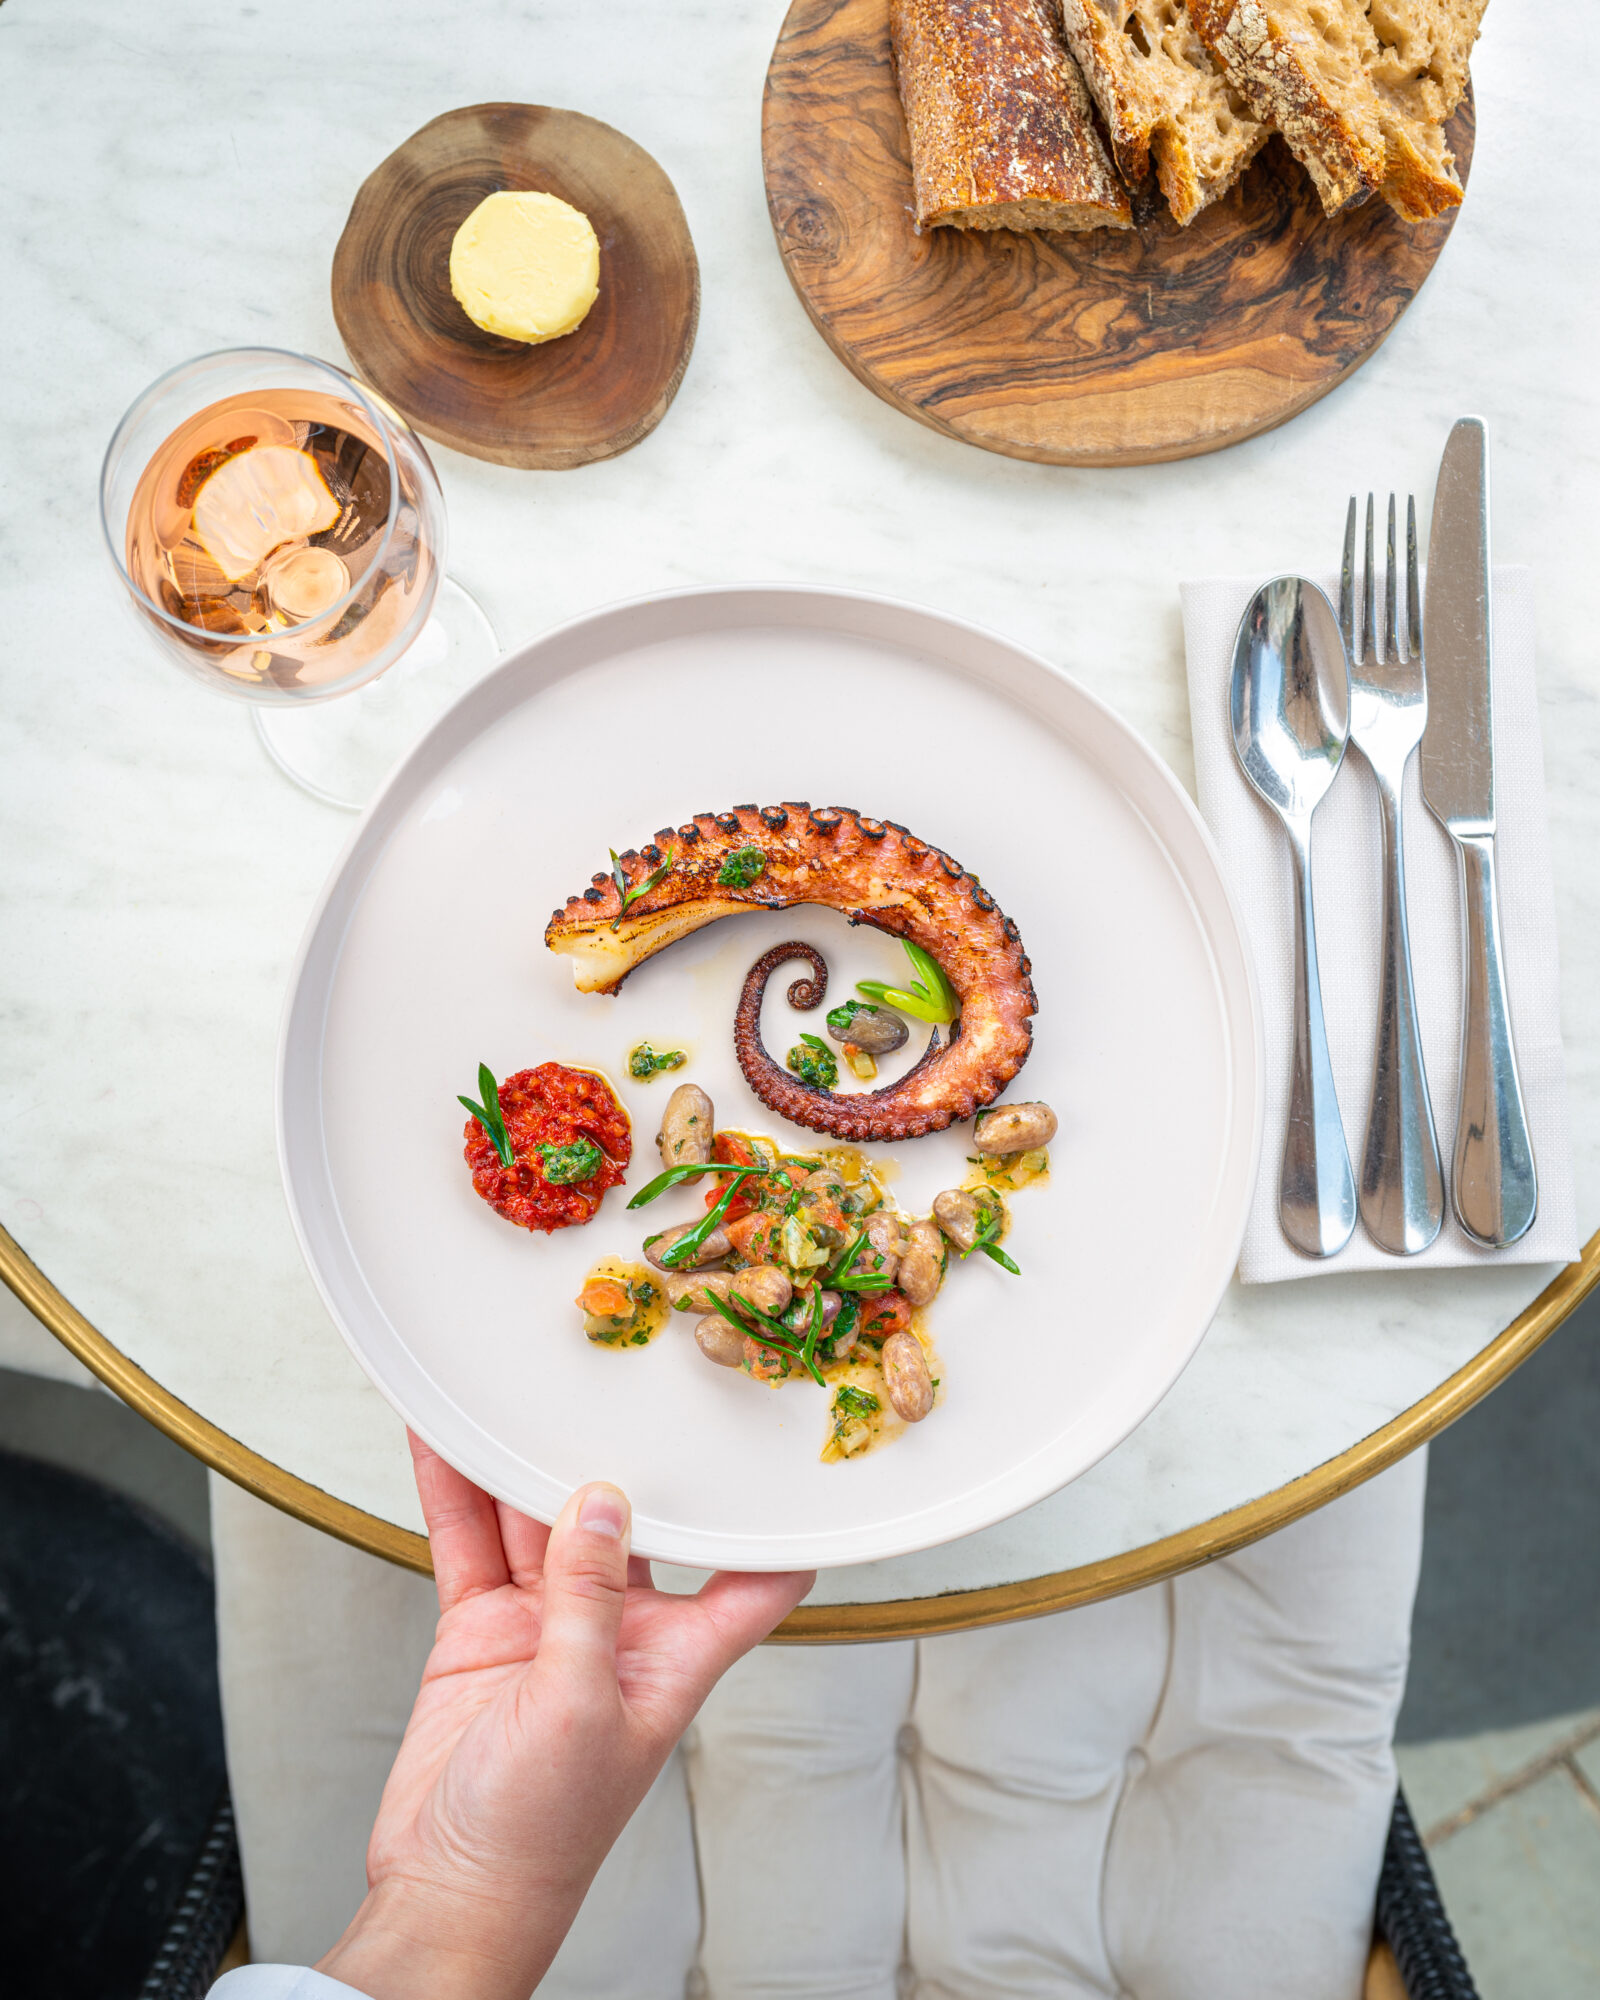 Grilled-Galician-octopus-smoked-paprika-and-Moroccan-lemon-PORTRAIT-credit-OL-Visual.jpg